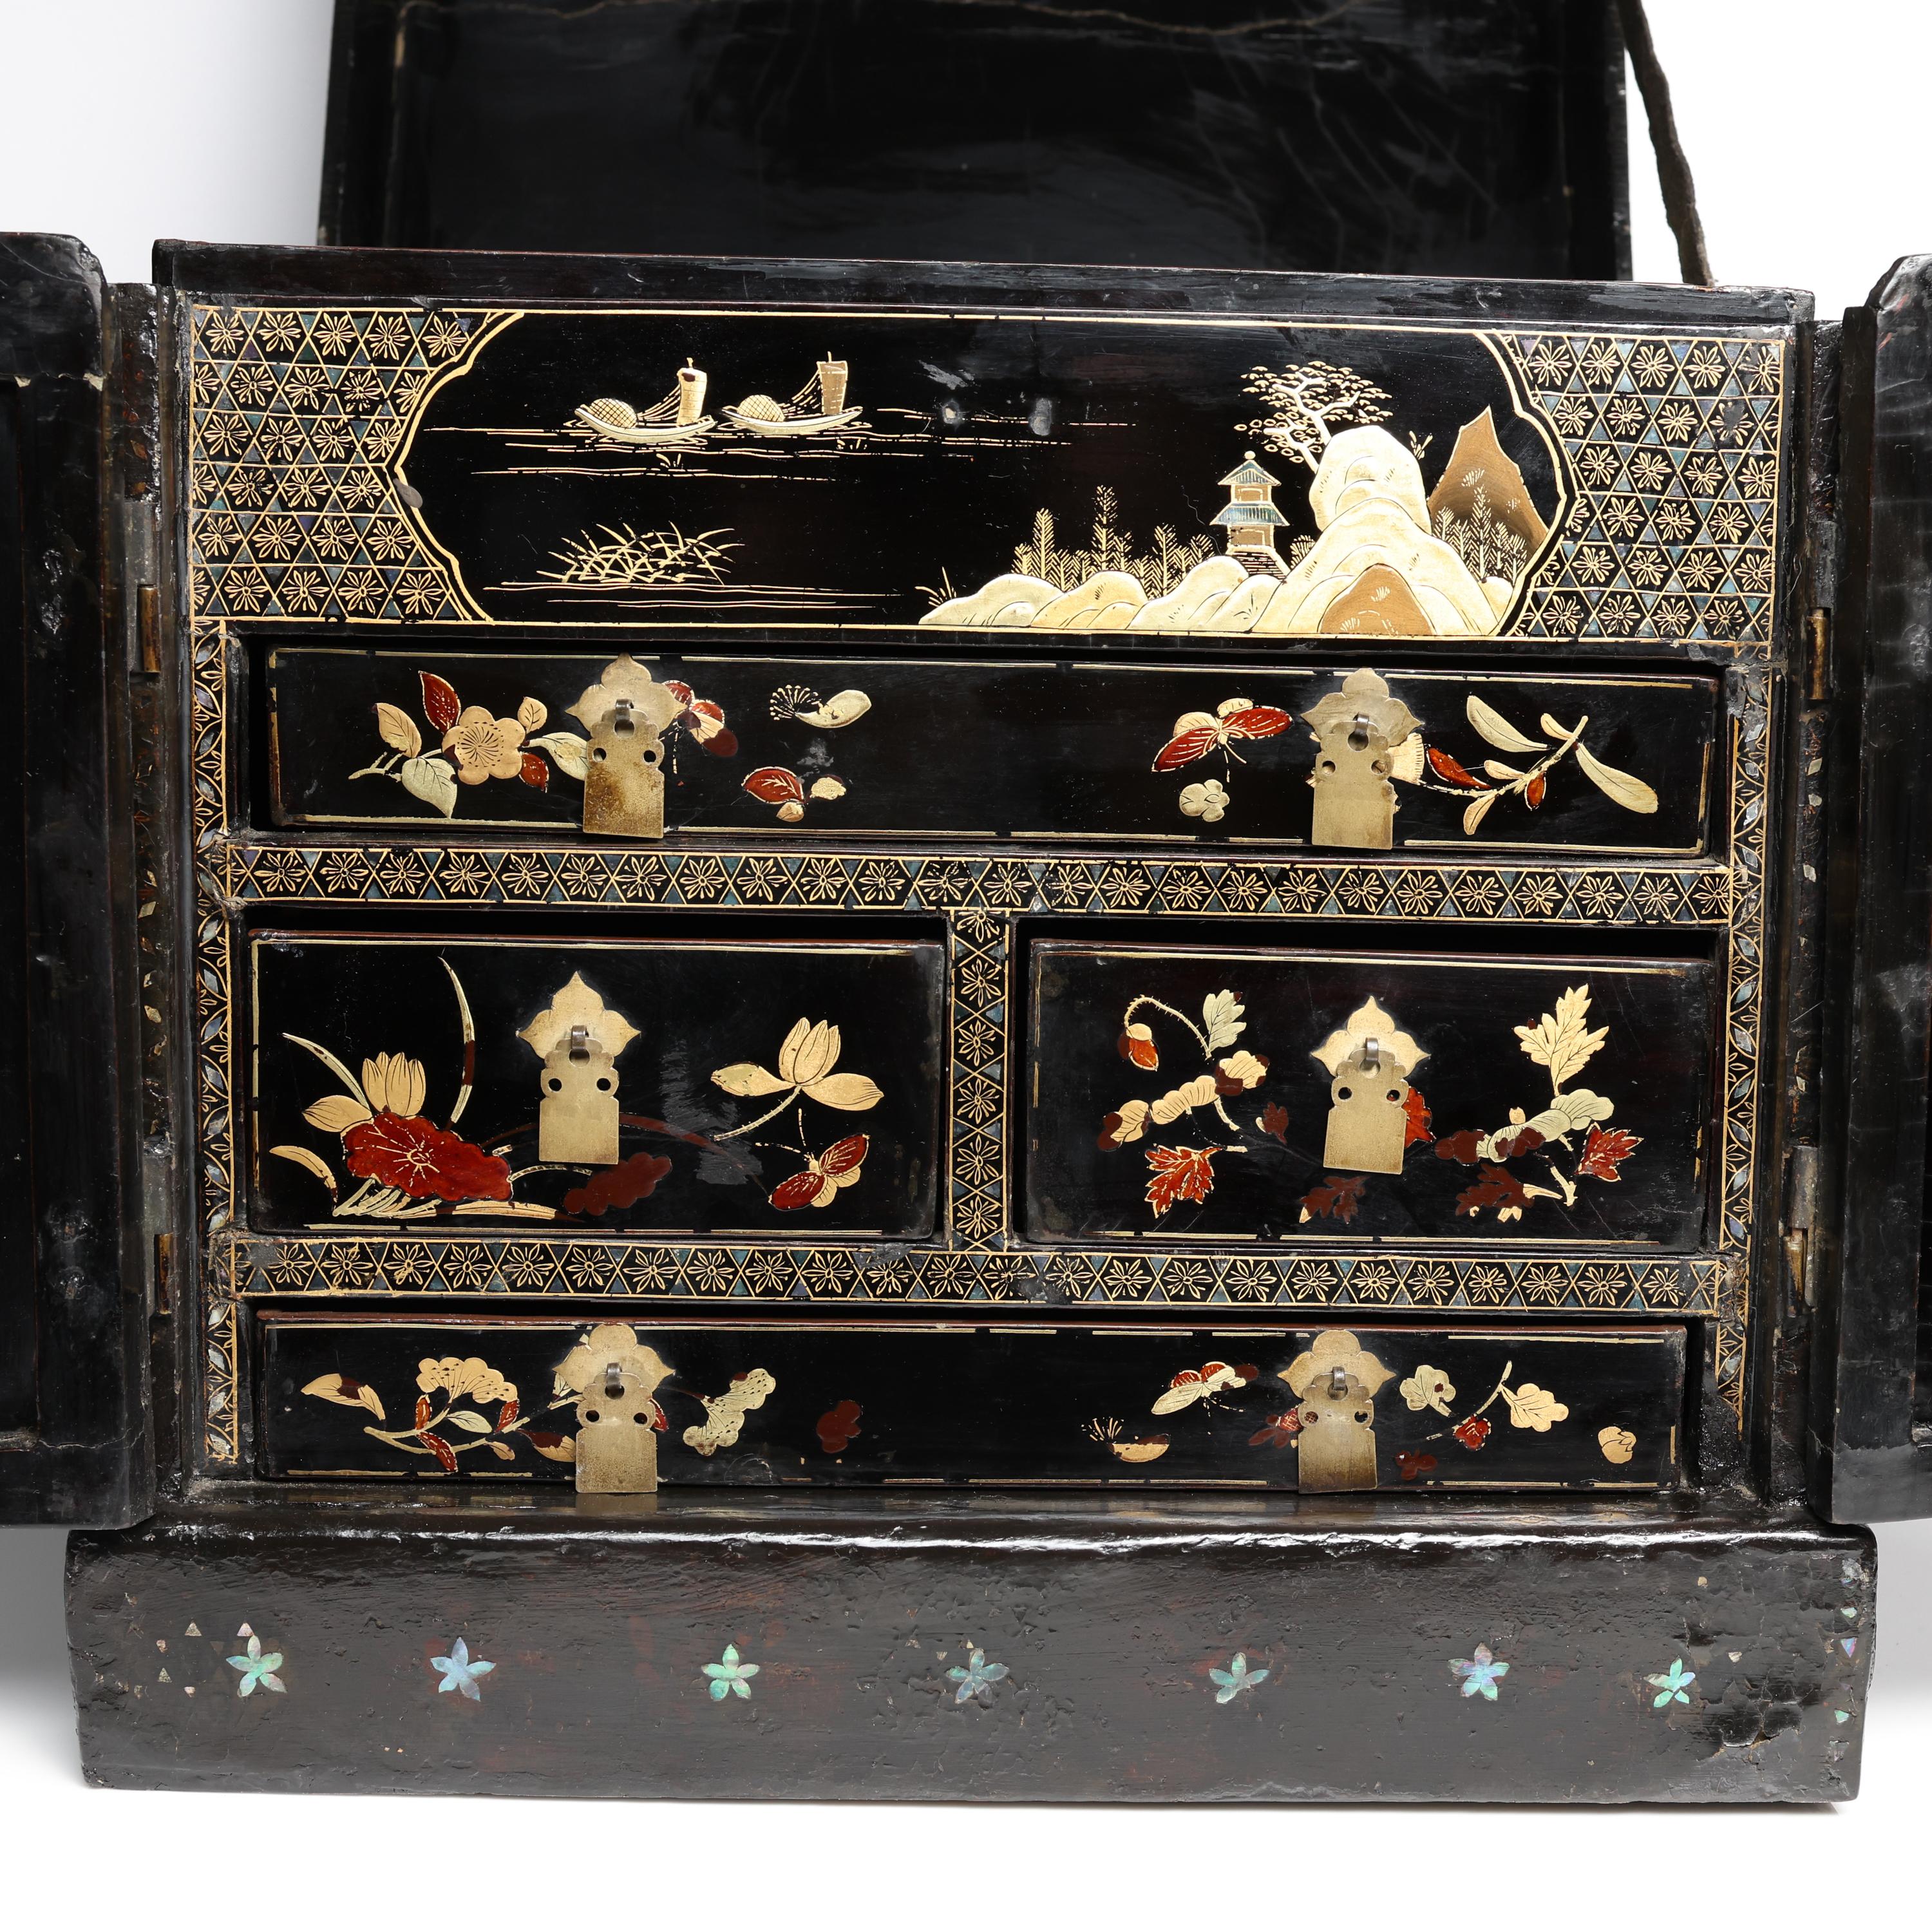 Artisan Antique Jewelry Chest Japanese Black Lacquer For Sale